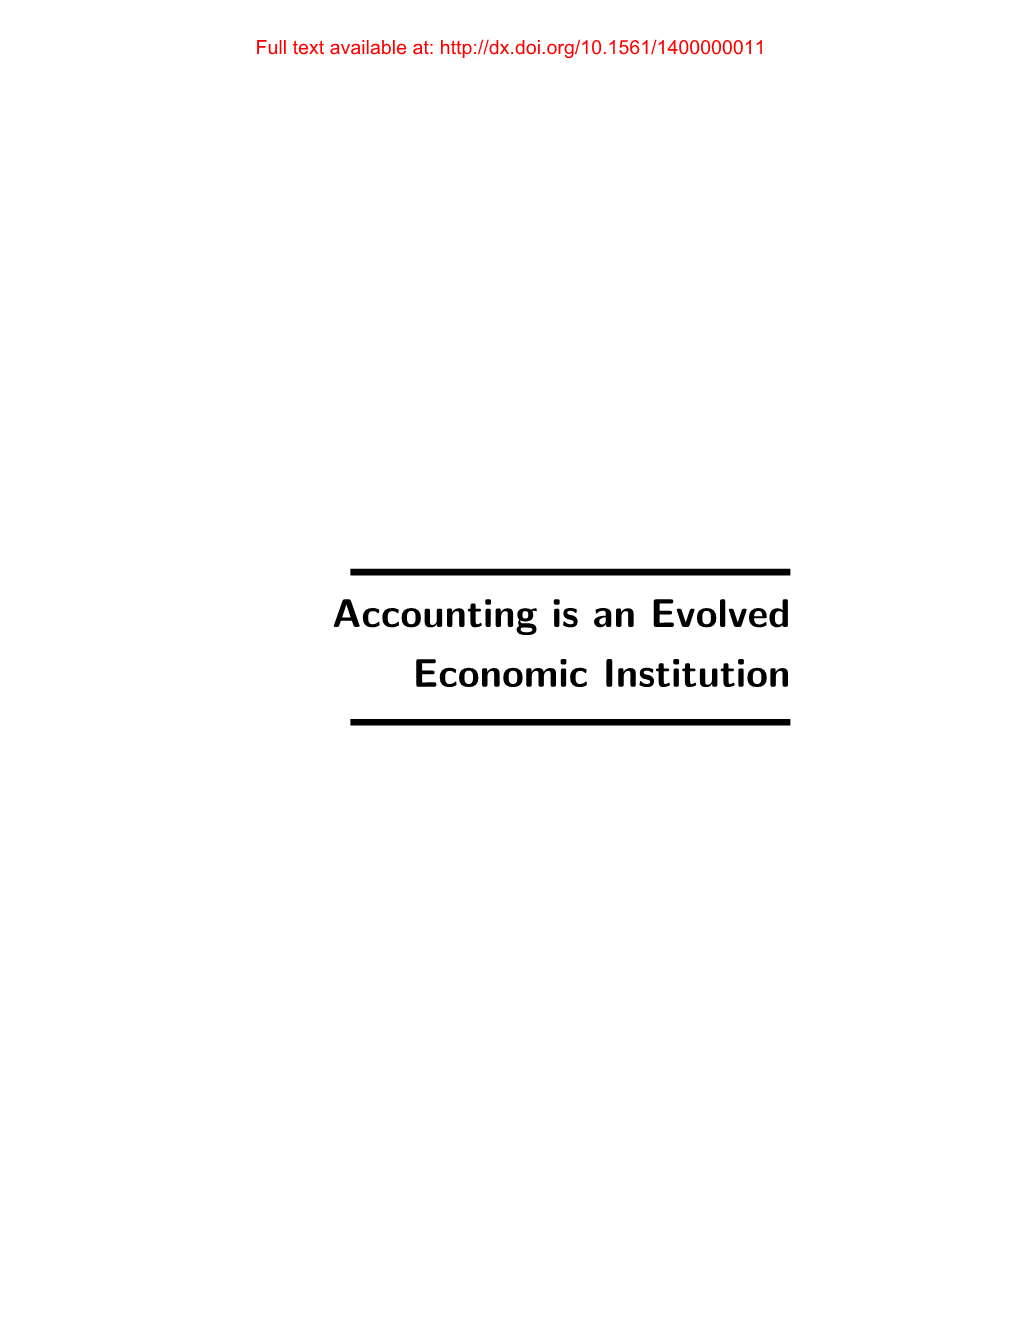 Accounting Is an Evolved Economic Institution Full Text Available At